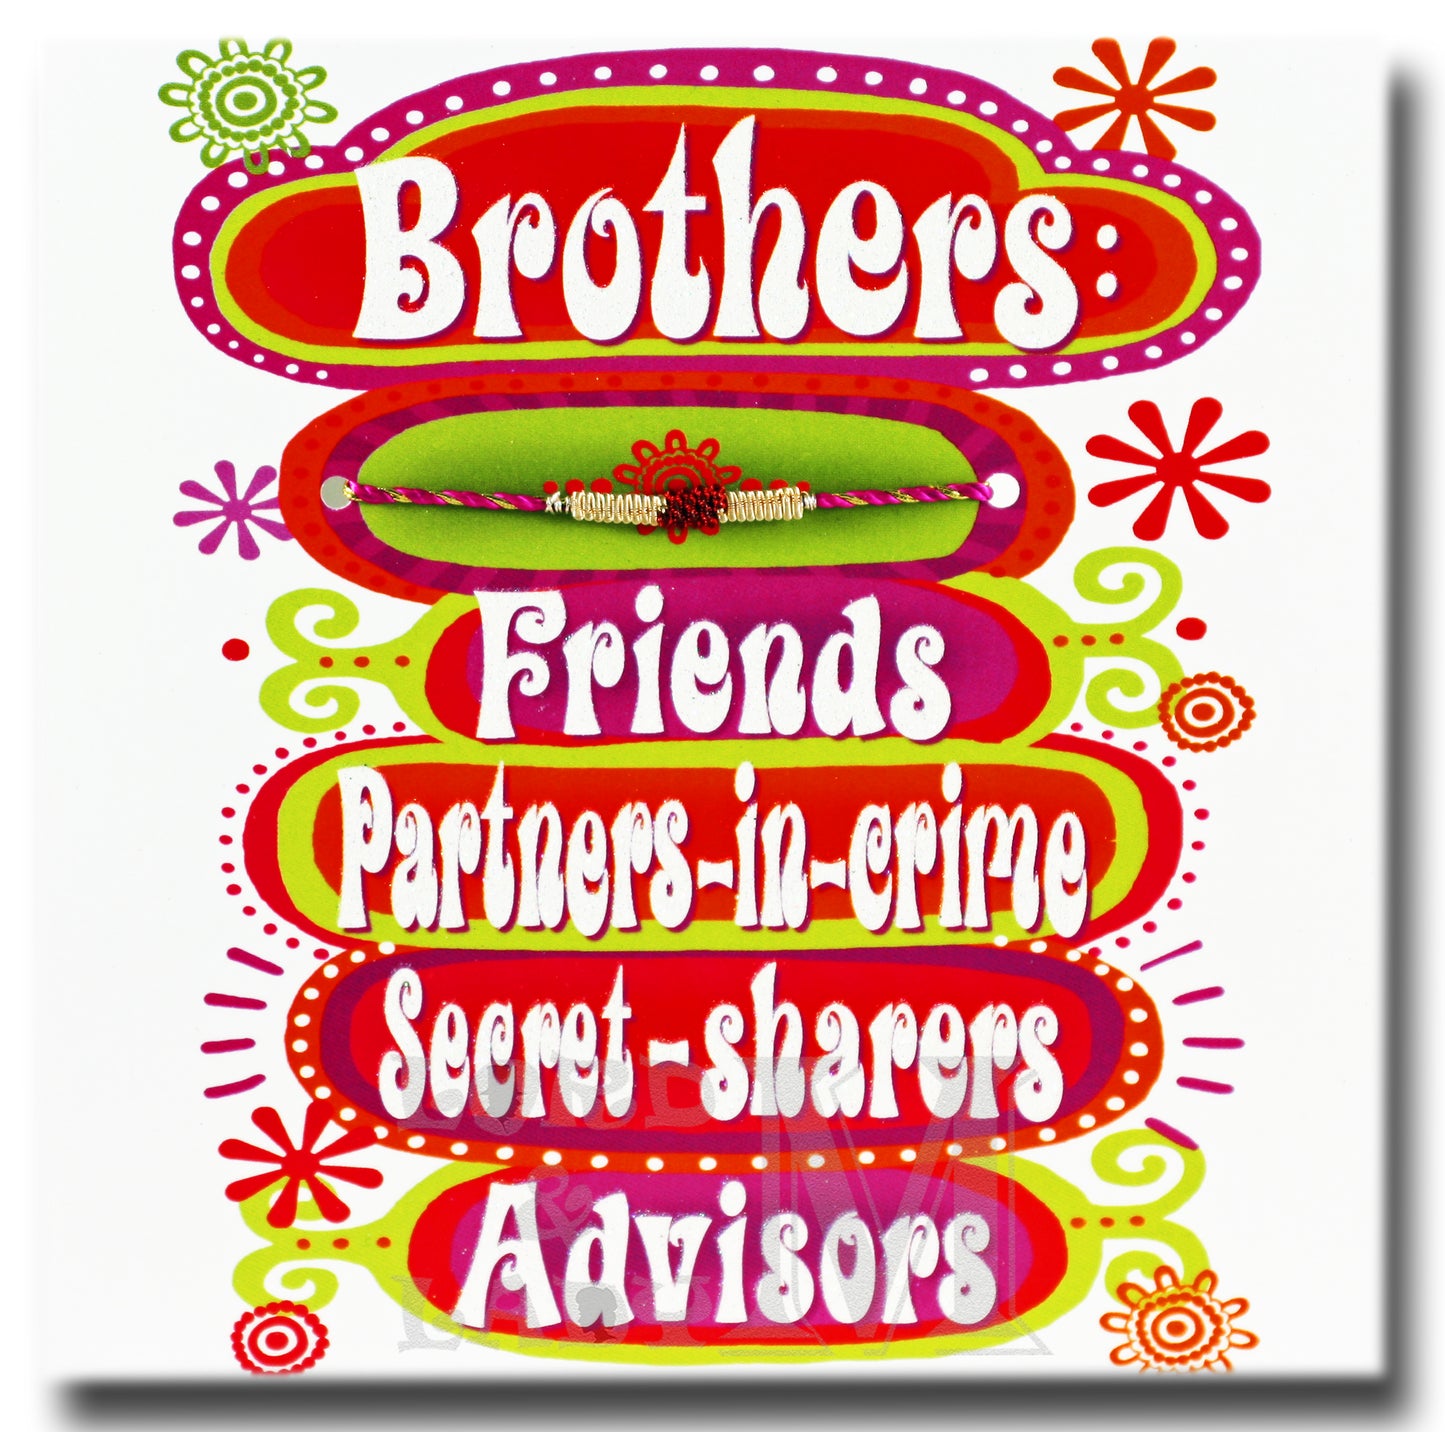 15cm - Brothers: Friends Partners-in-Crime .. - DV